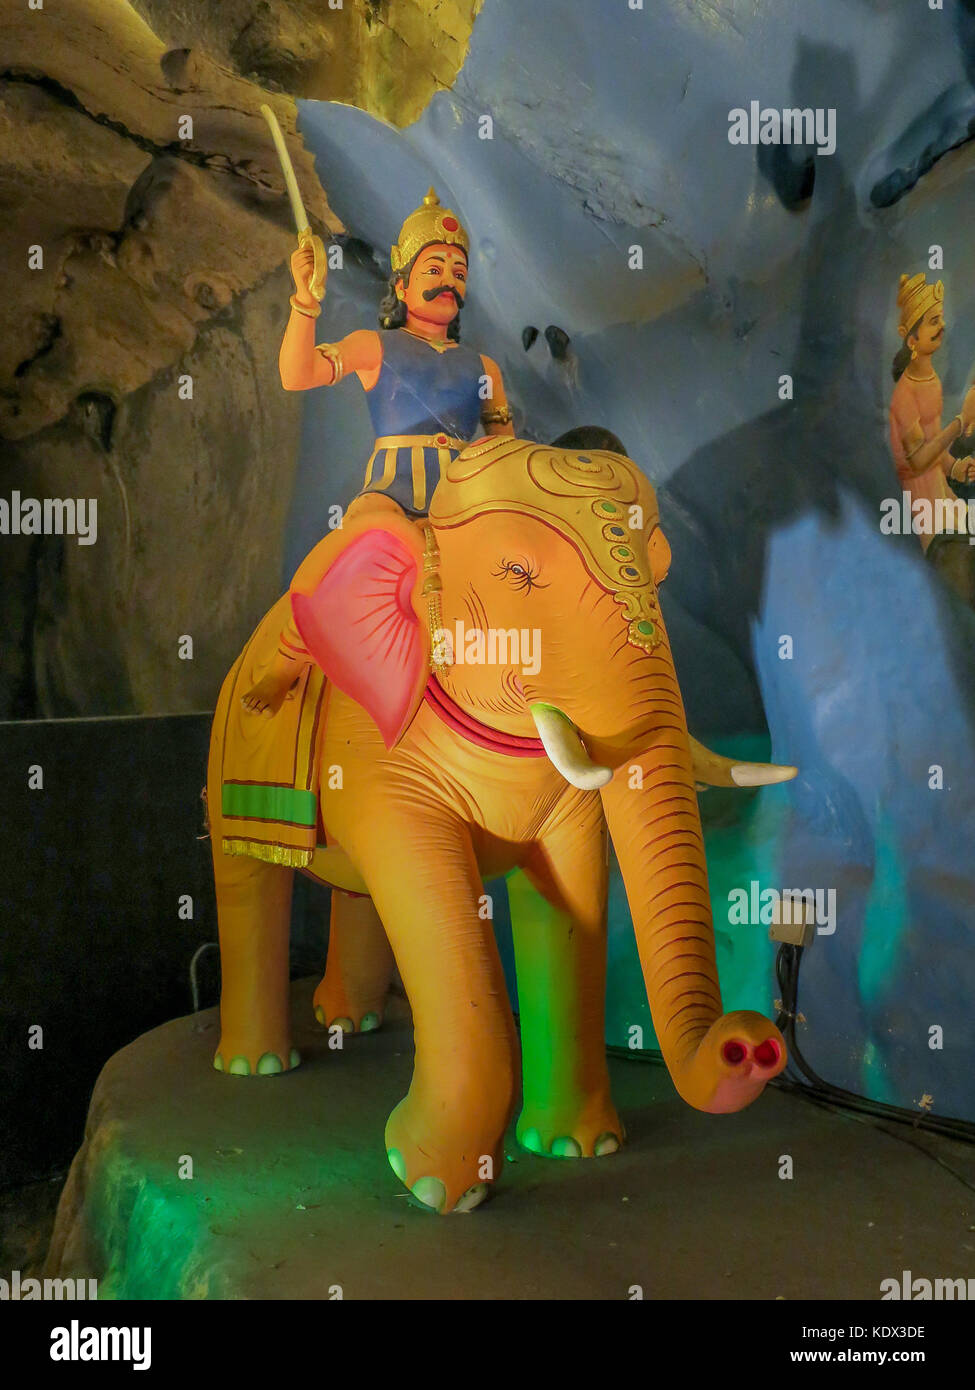 One of several Hinduism religious dioramas inside the Ramayana Cave at the Batu Caves just outside of Kuala Lumpur, Malaysia. Stock Photo